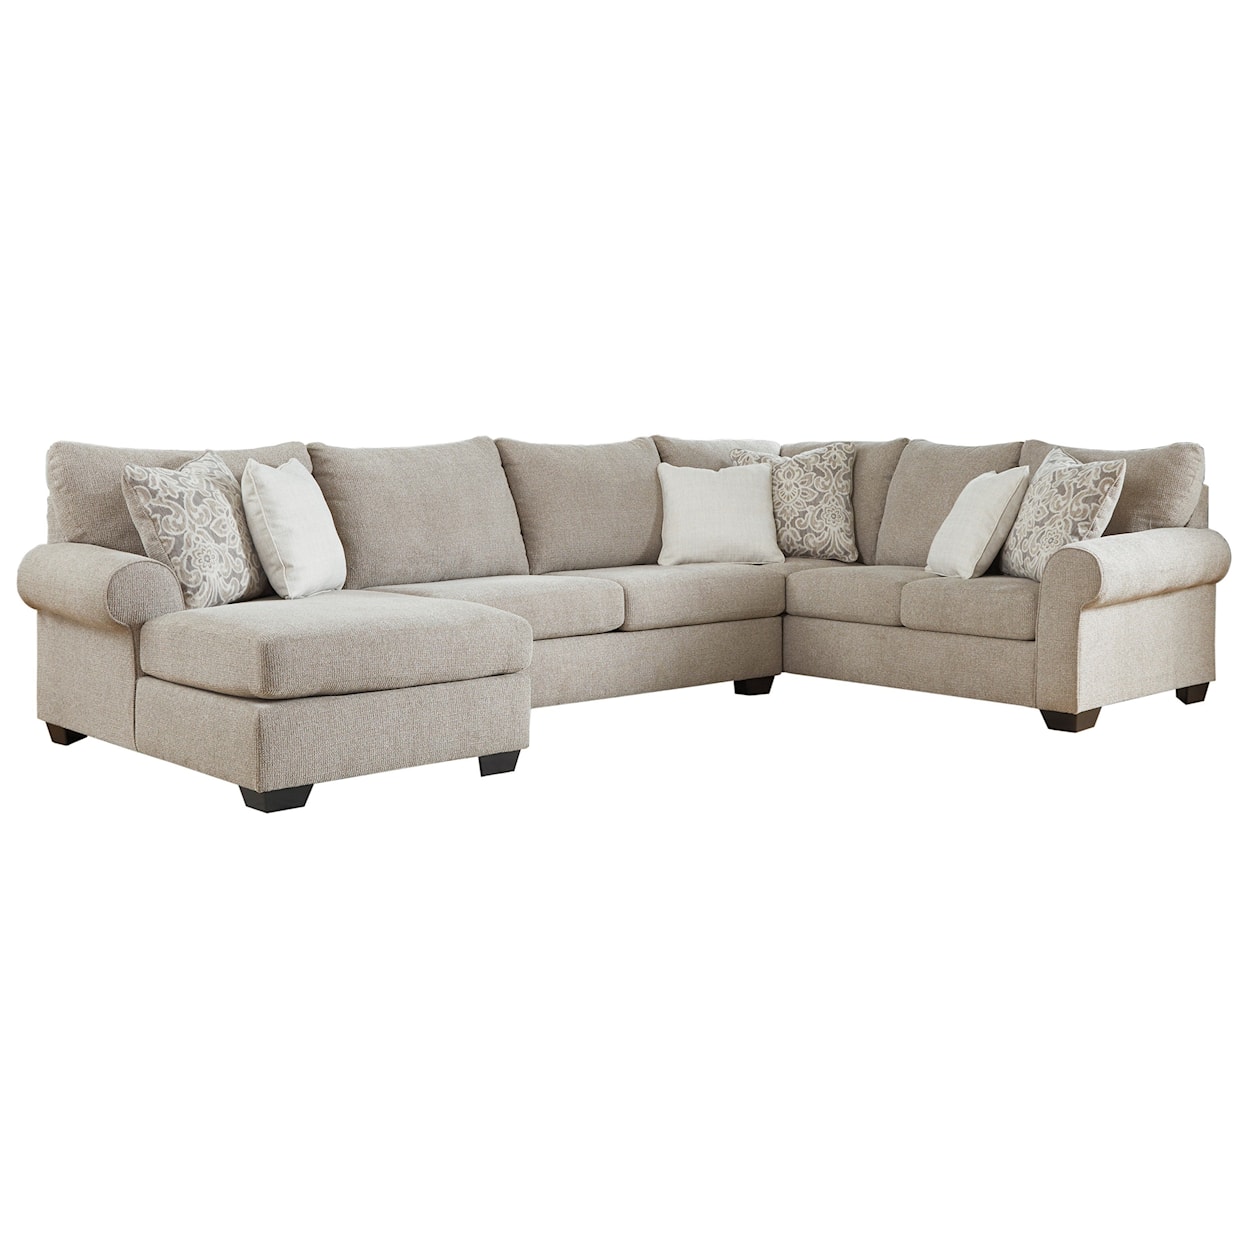 Benchcraft Baranello 3-Piece Sectional with Left Chaise